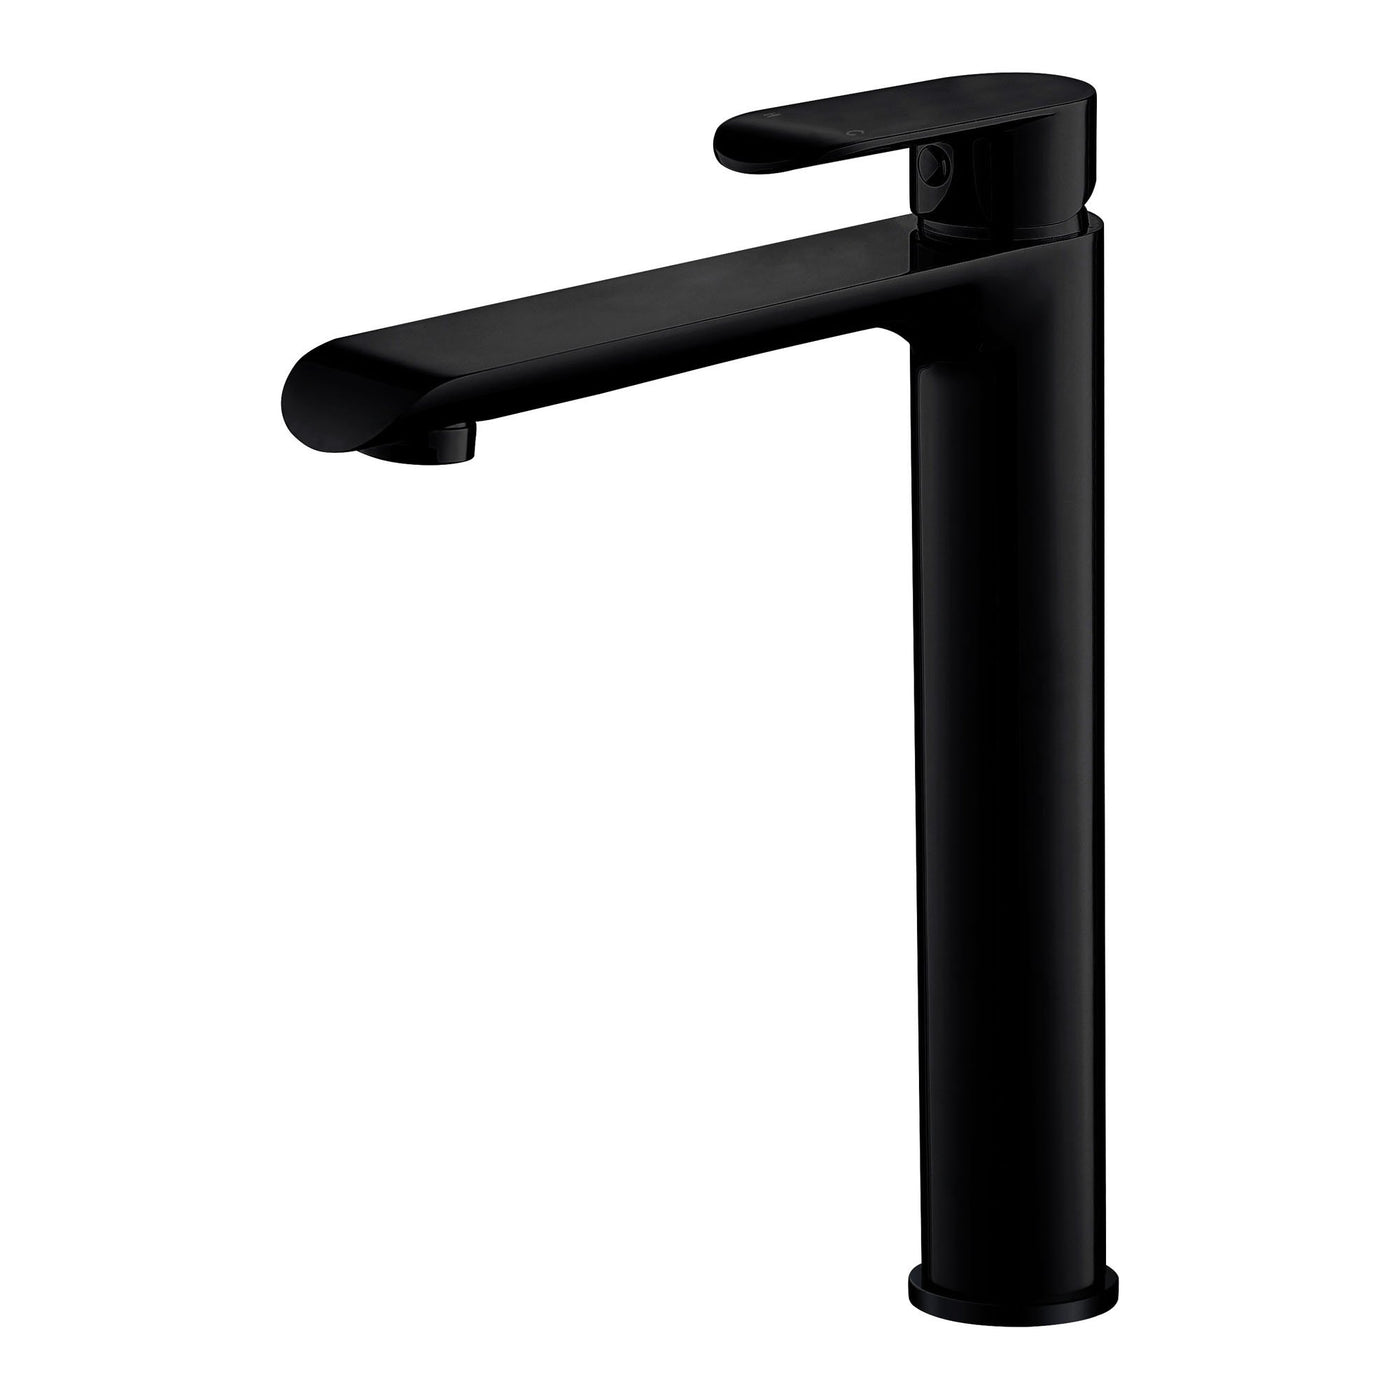 Oval Tower Basin Mixer